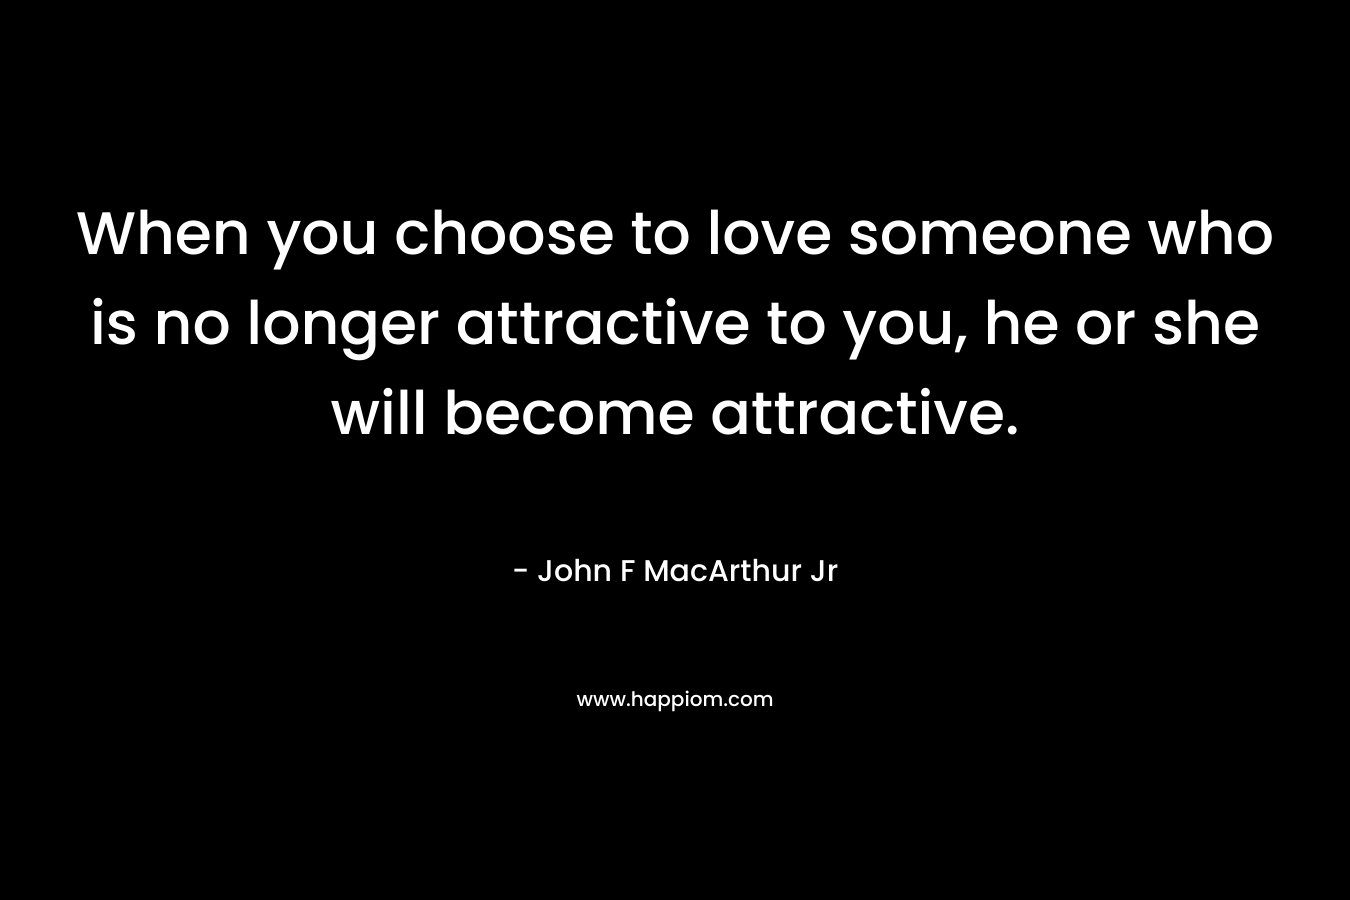 When you choose to love someone who is no longer attractive to you, he or she will become attractive.